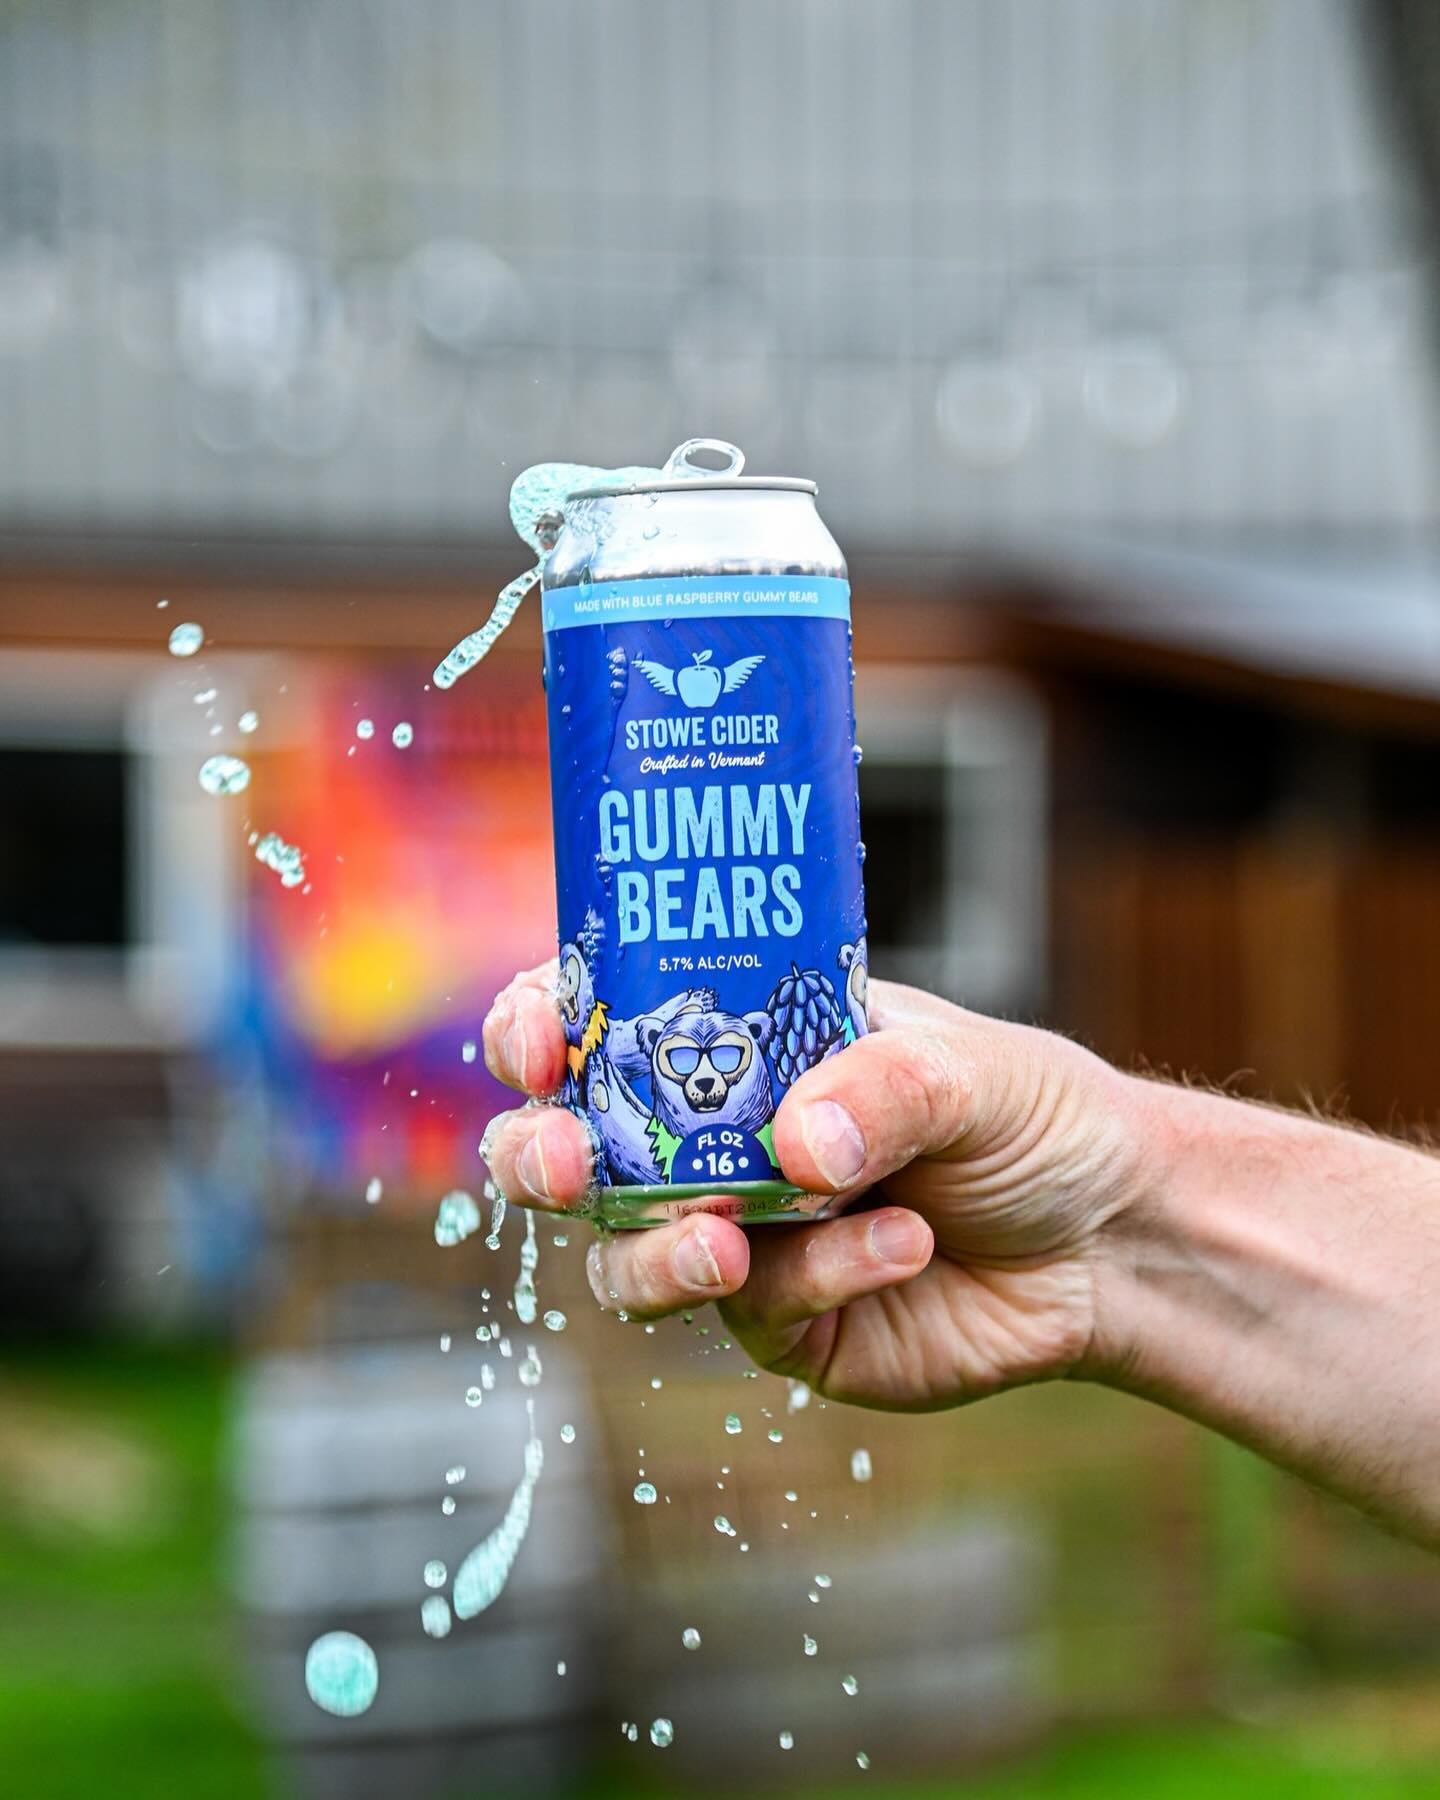 You ask and we deliver - GUMMY BEARS! With a fresh new look and the same great flavor, the true Stowe Cider cult-classic is back. At 5.7%, we&rsquo;ve infused our signature dry cider with a healthy dose of blue raspberry gummy bears, giving it that c